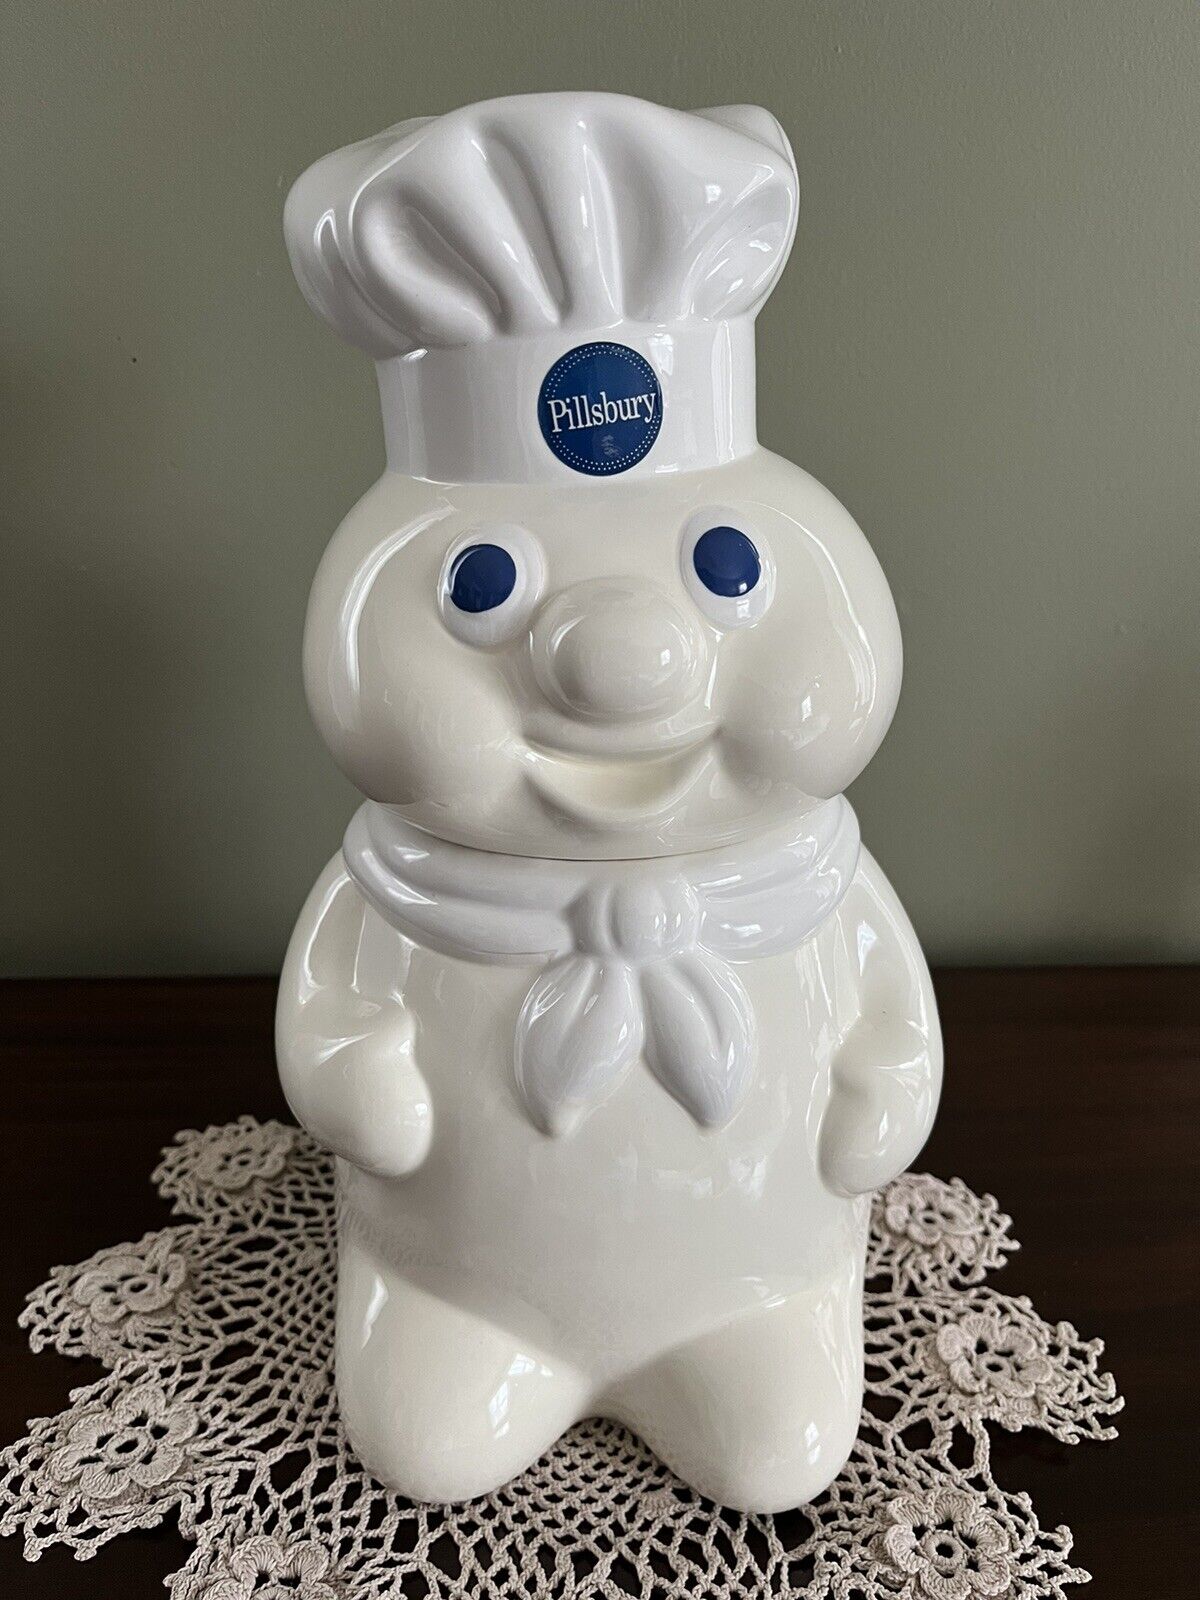 Pillsbury Doughboy Cookie Jar -12 inches Tall Excellent Condition